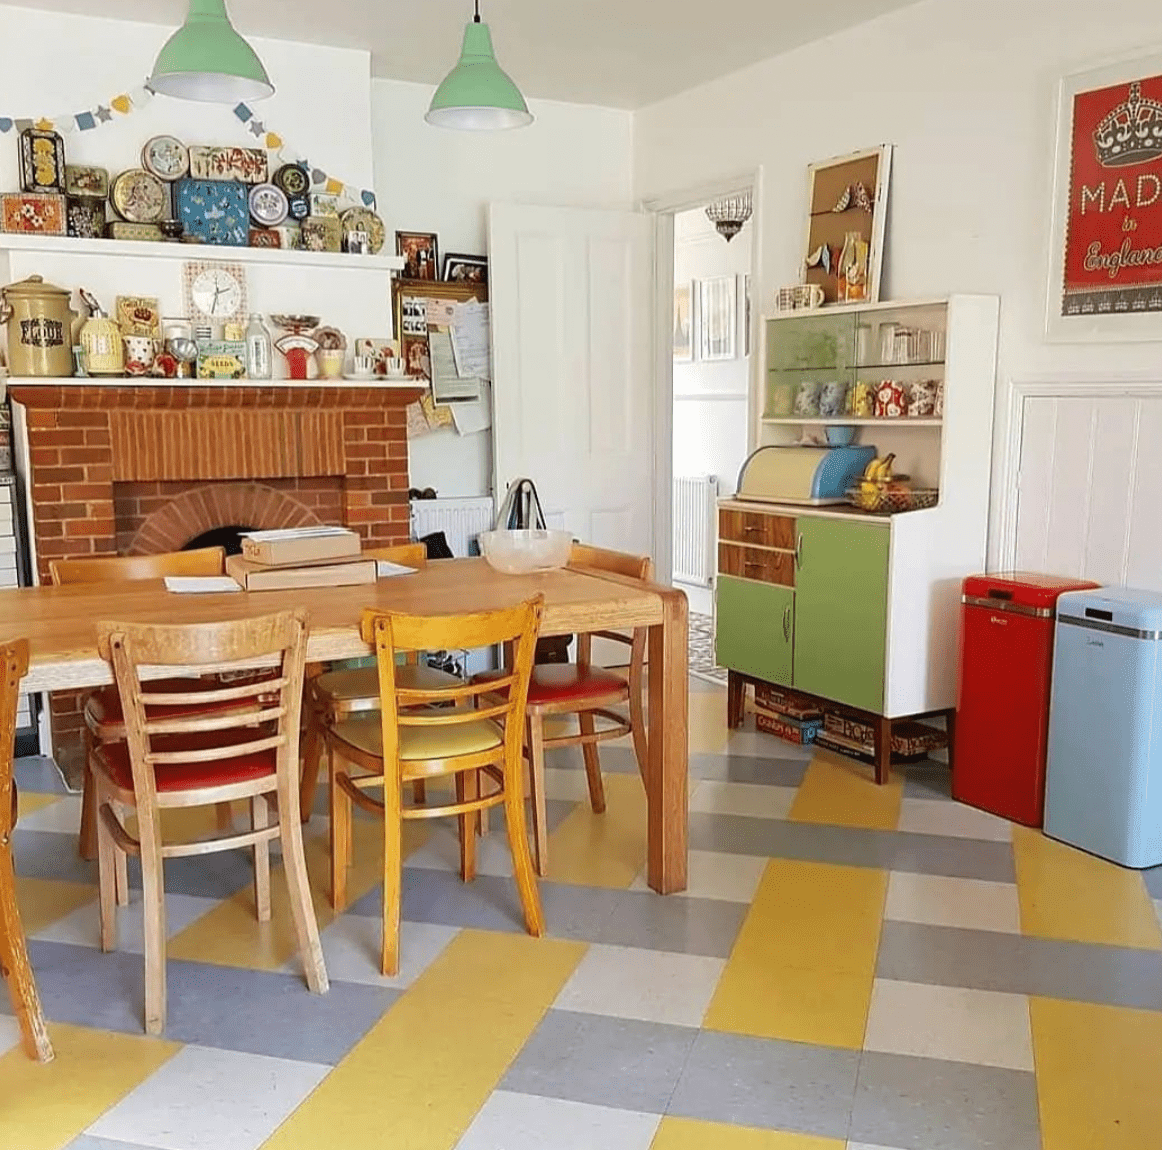 gray and yellow checkered floor